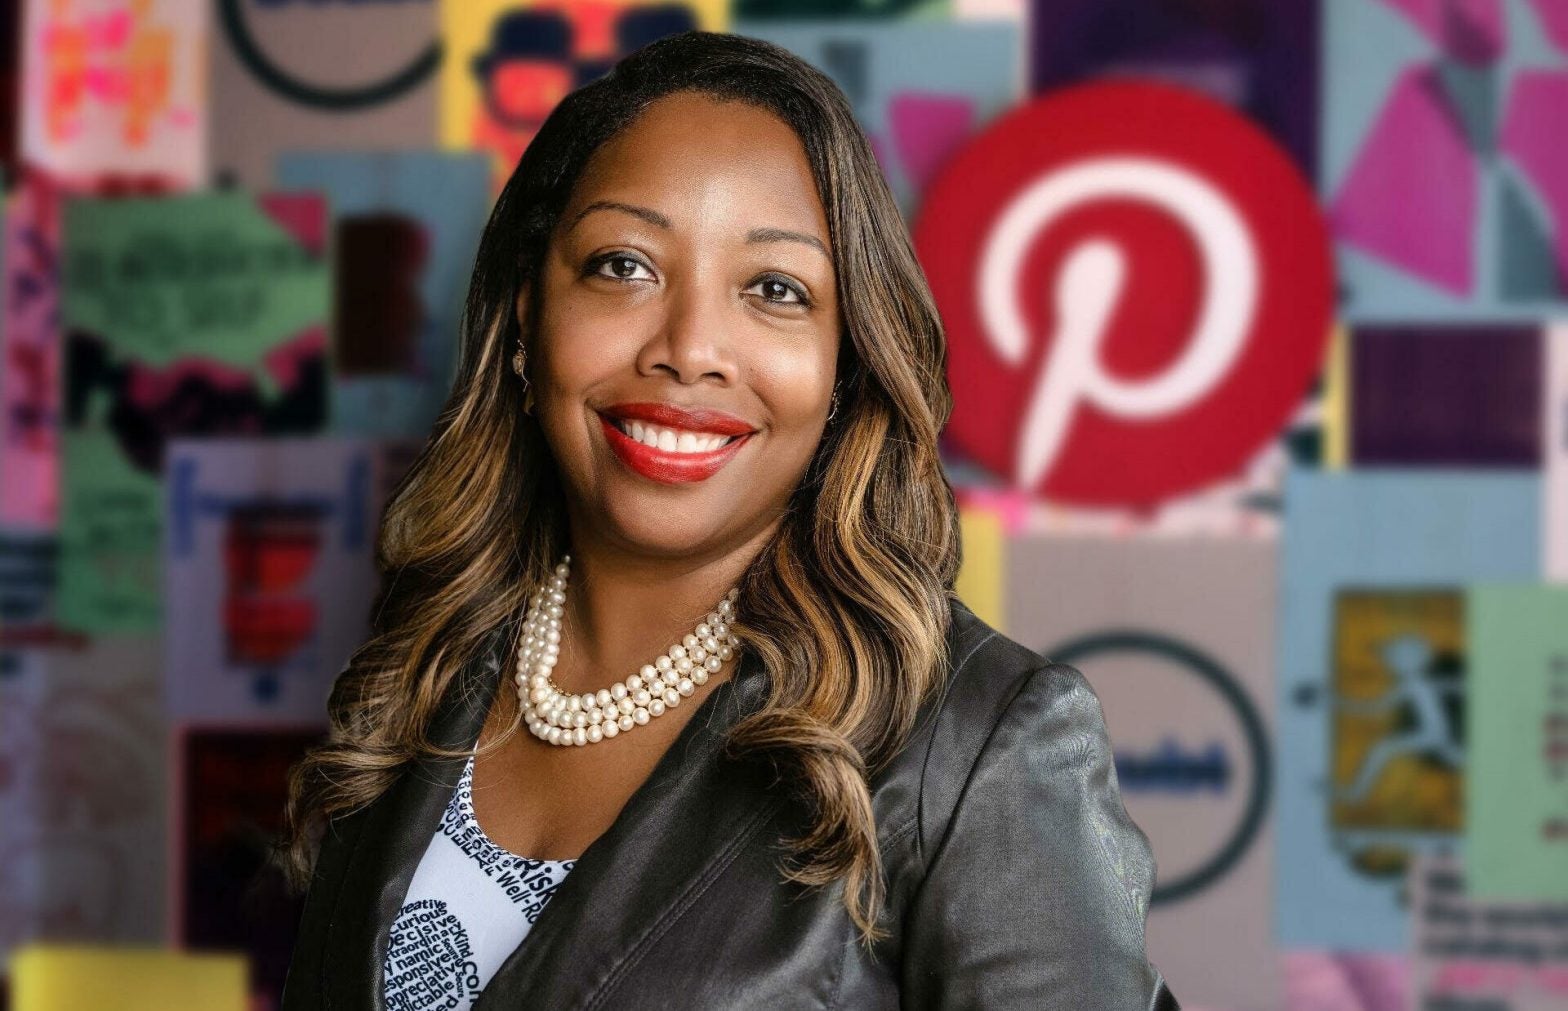 Off The Clock With Pinterest's Global Head of I&D, Nichole Barnes Marshall